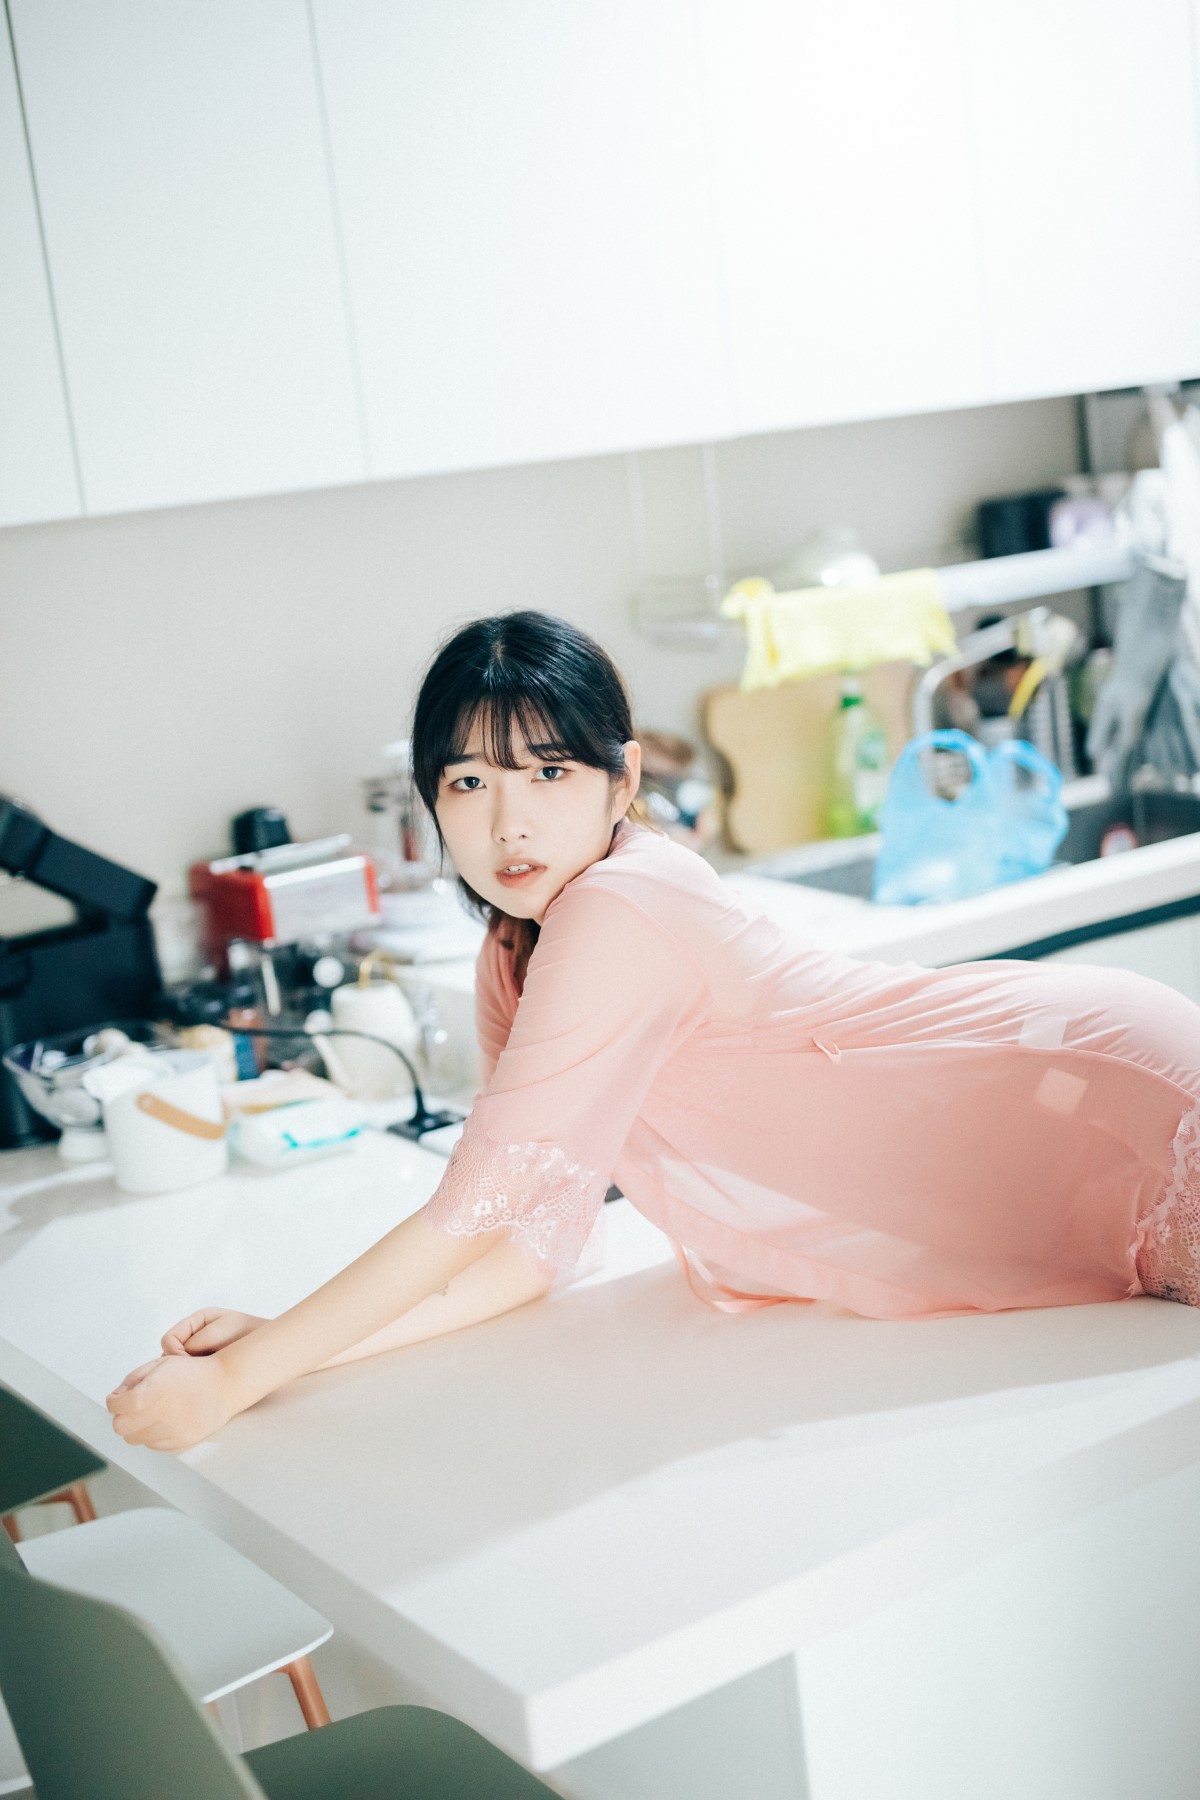 Loozy SonSon 손손 Date At Home S Ver 0077 1002762985.jpg